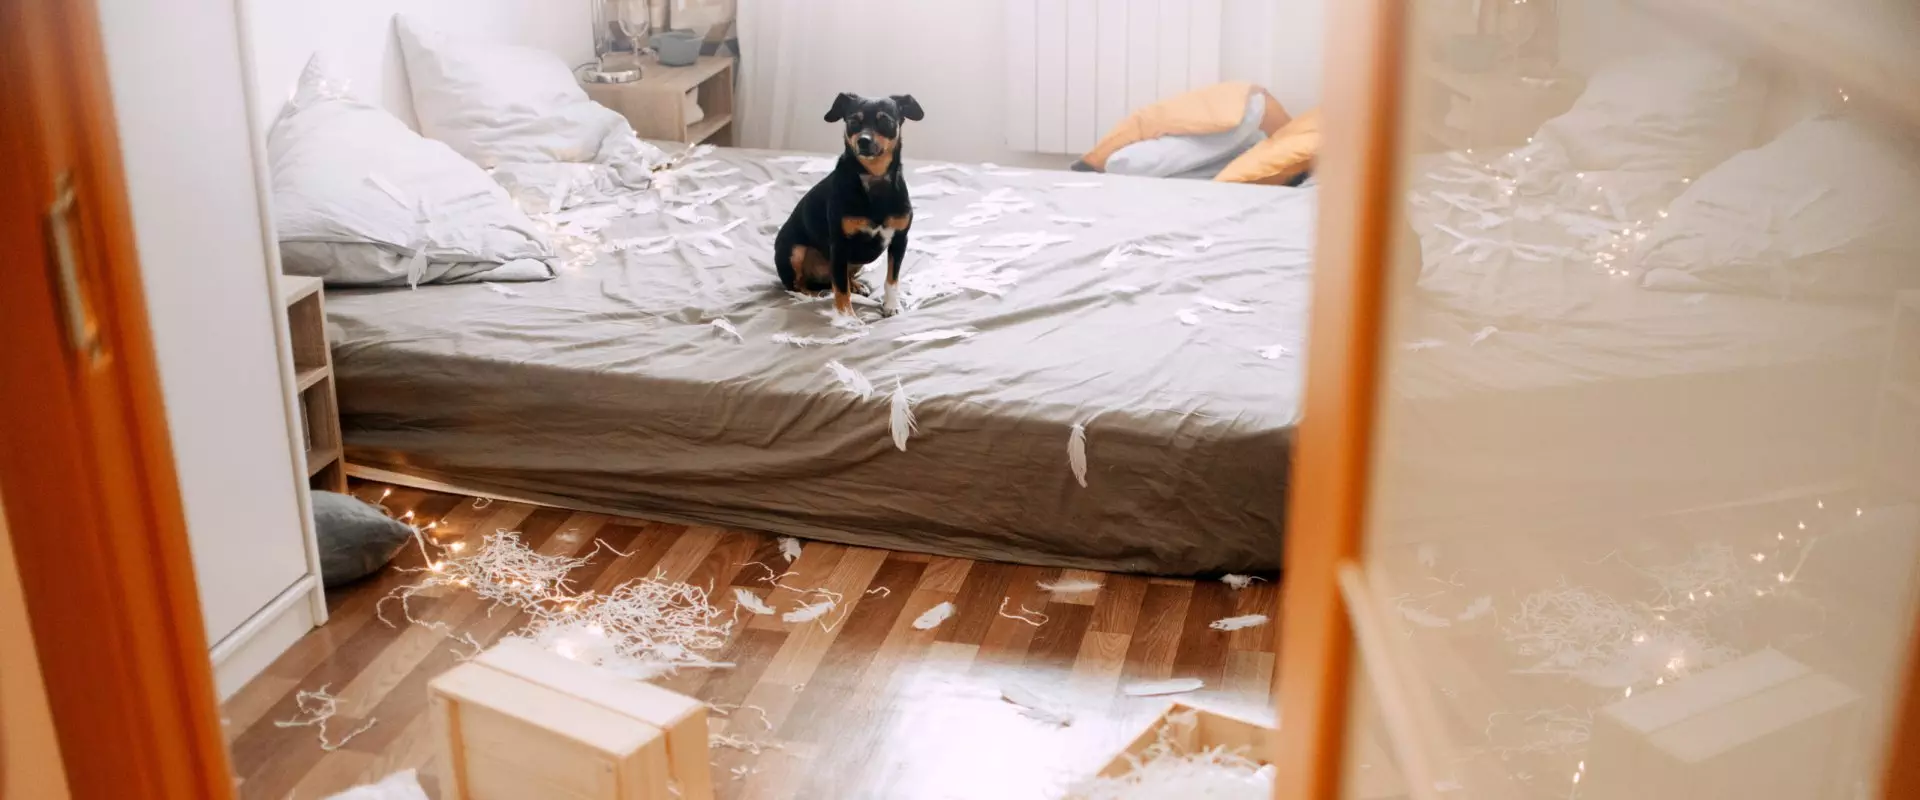 What renter’s insurance covers damage caused by pets?